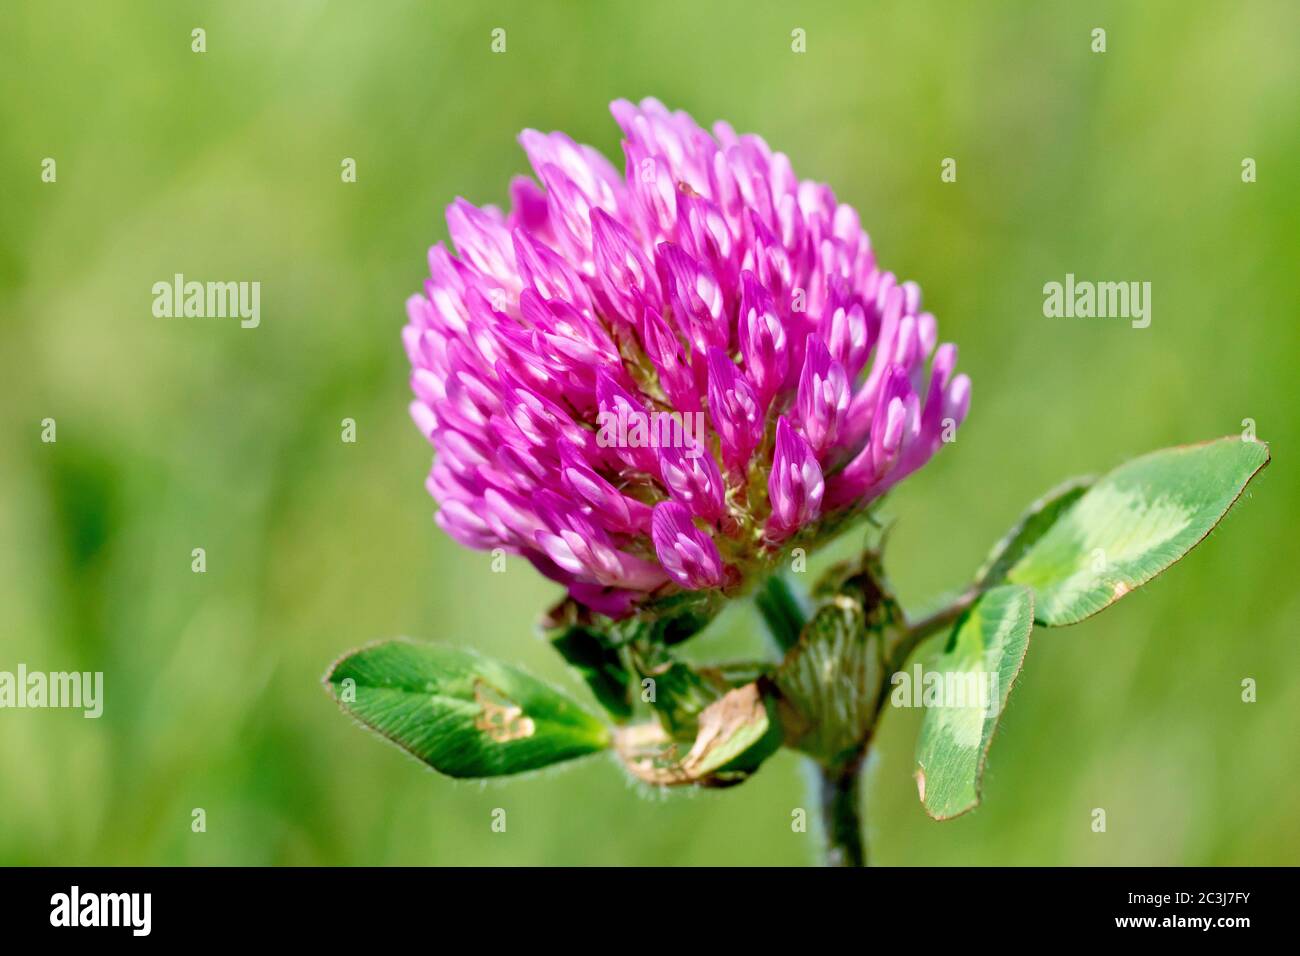 Red Clover (trifolium pratense), close up showing the flowerhead and leaves isolated against a plain out of focus background. Stock Photo